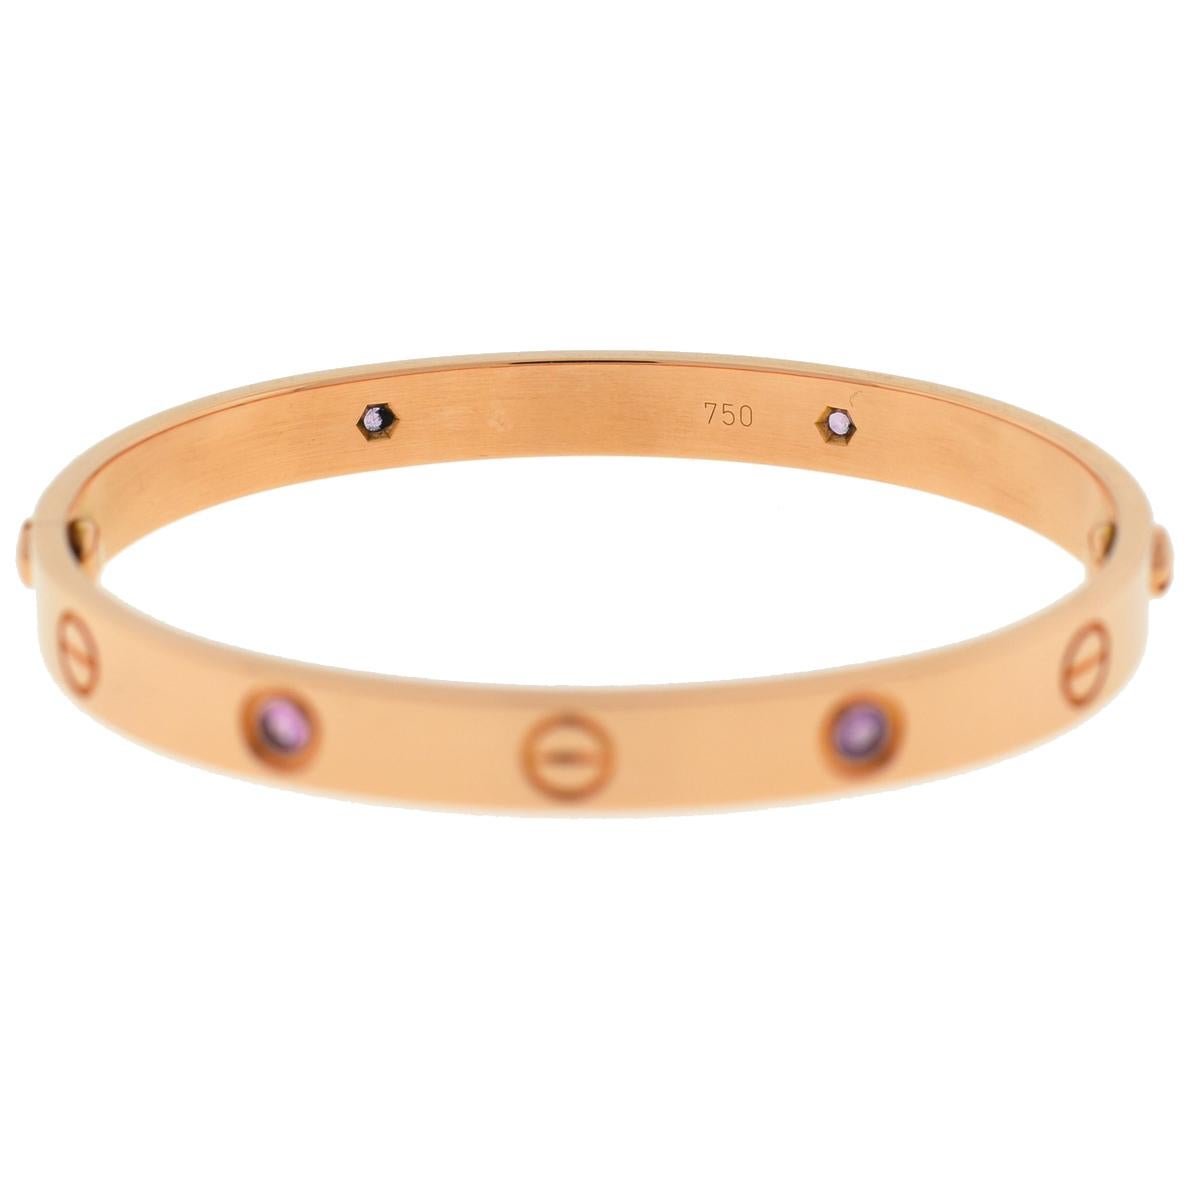 cartier love bracelet with pink sapphire